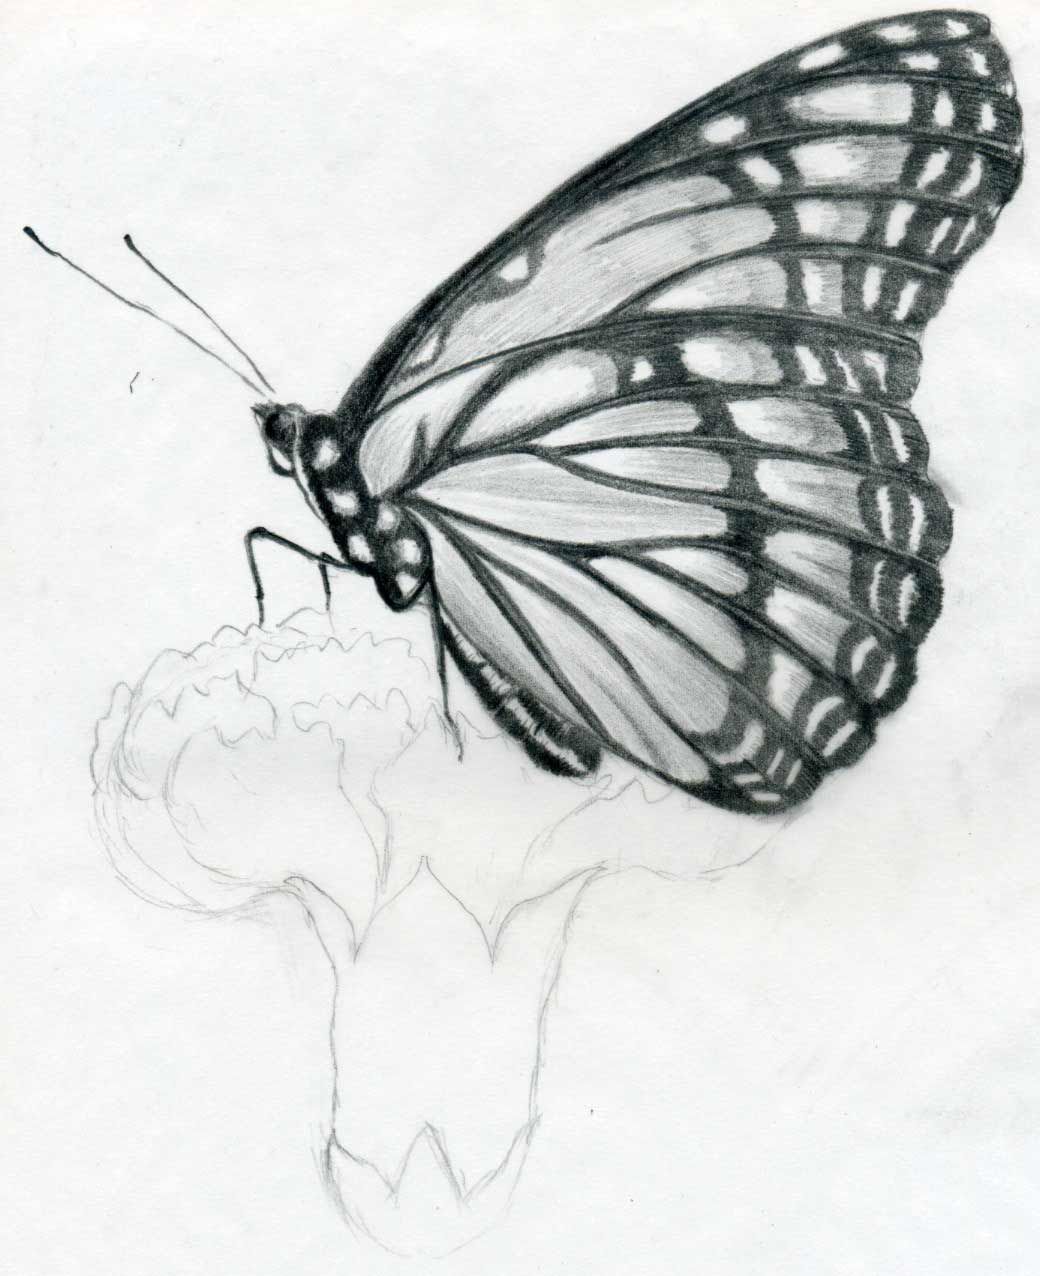 sketches.. drawing butterfly sketches wallpaper birds Sketches Wallpaper. Pencil drawings of flowers, Flower sketches, Flower sketch pencil